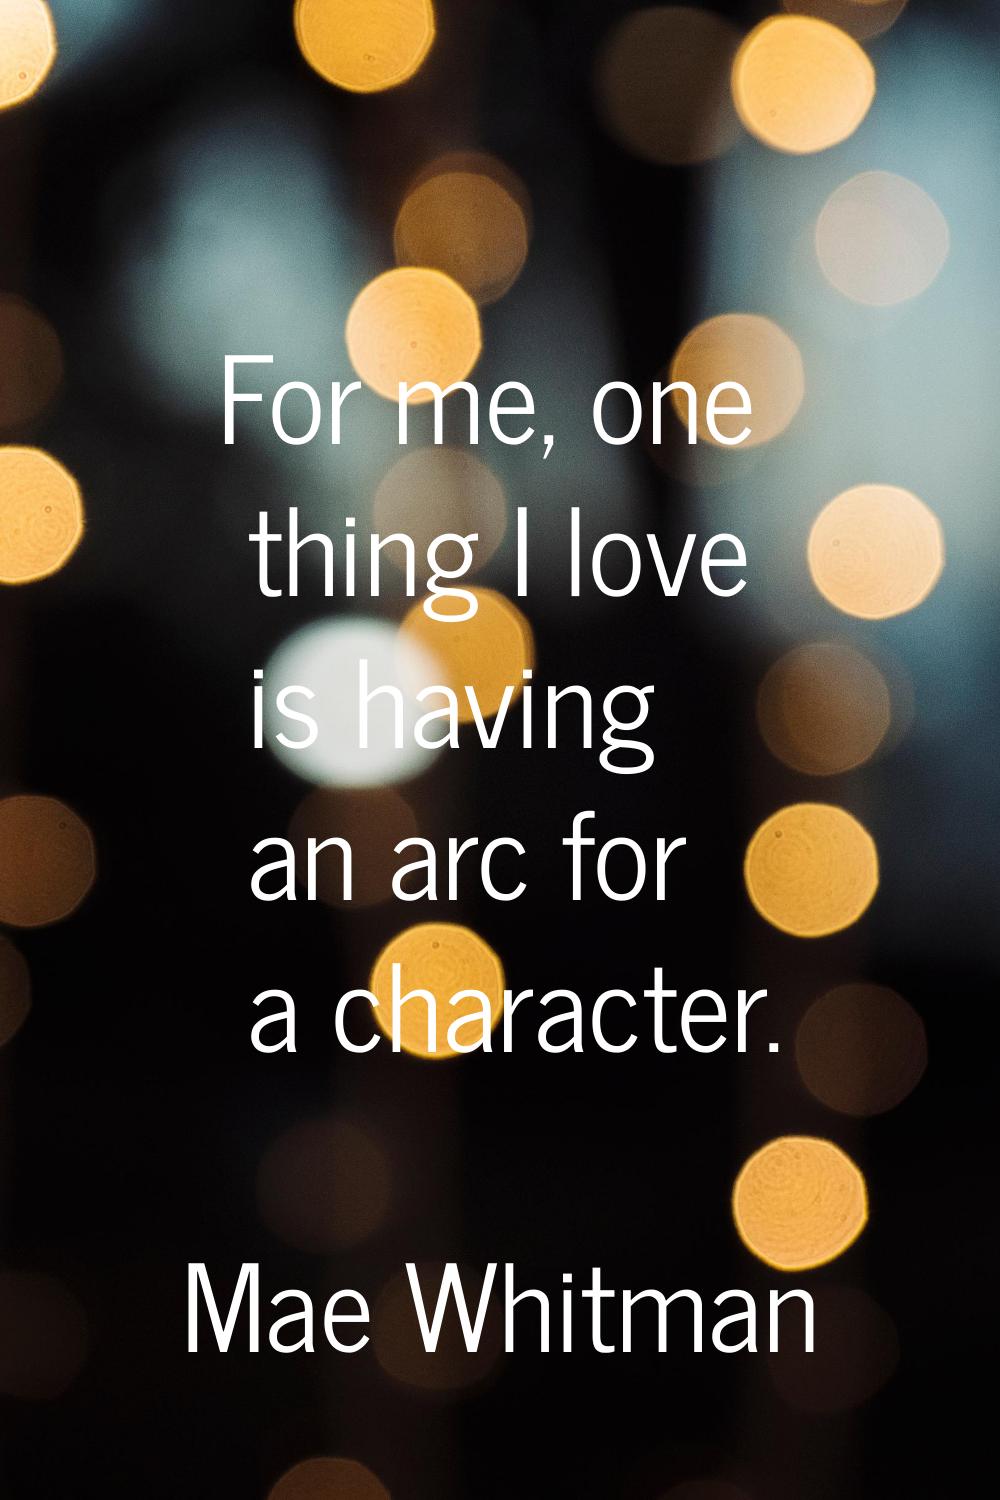 For me, one thing I love is having an arc for a character.